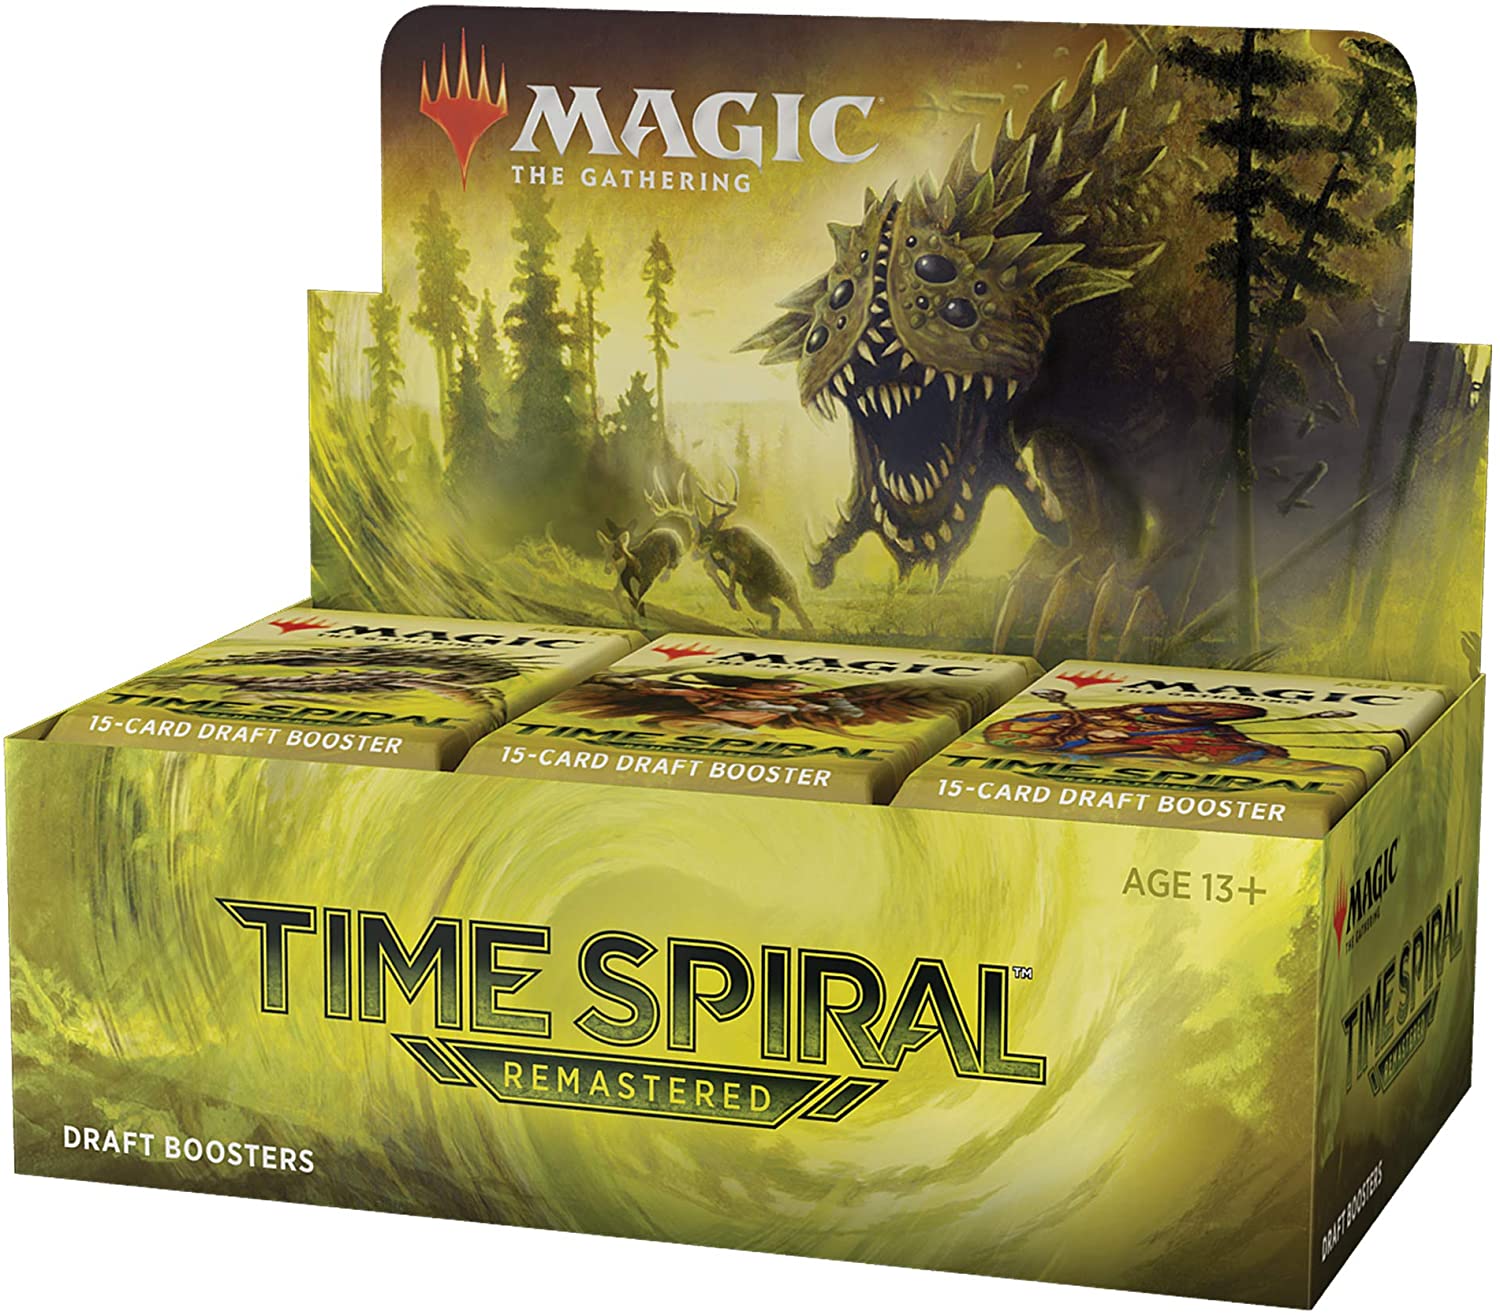 Magic The Gathering: Time Spiral Remastered Draft Booster Box 